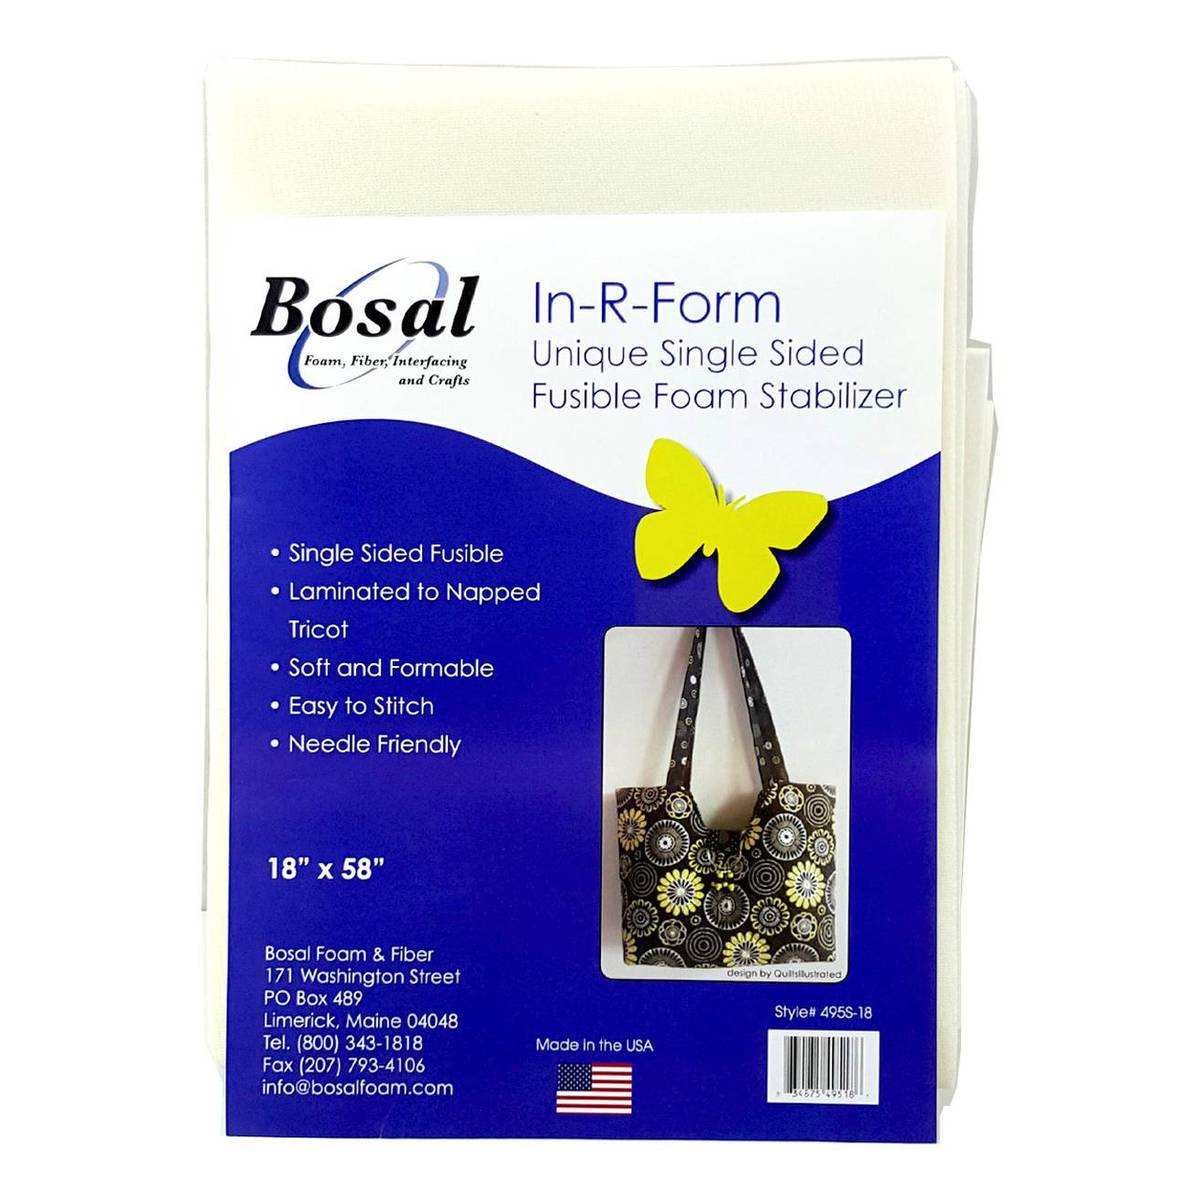 Bosal In-R-Form Single Sided Fusible Foam Stabilizer 18 x 58 Off White